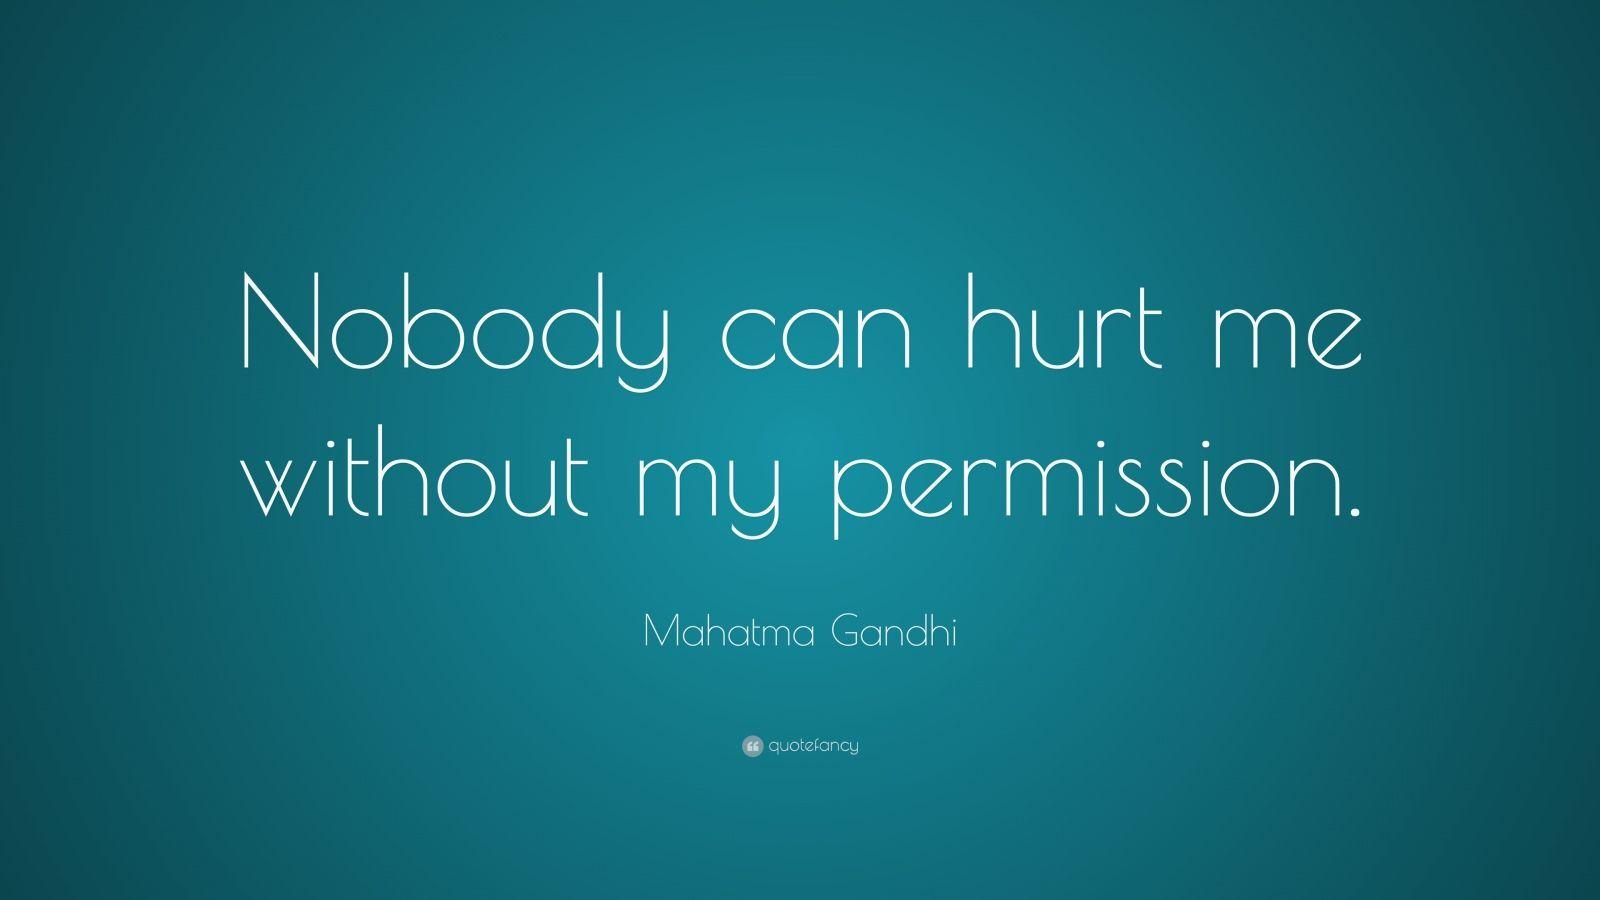 Mahatma Gandhi Quote: “Nobody can hurt me without my permission.” (22 wallpaper)